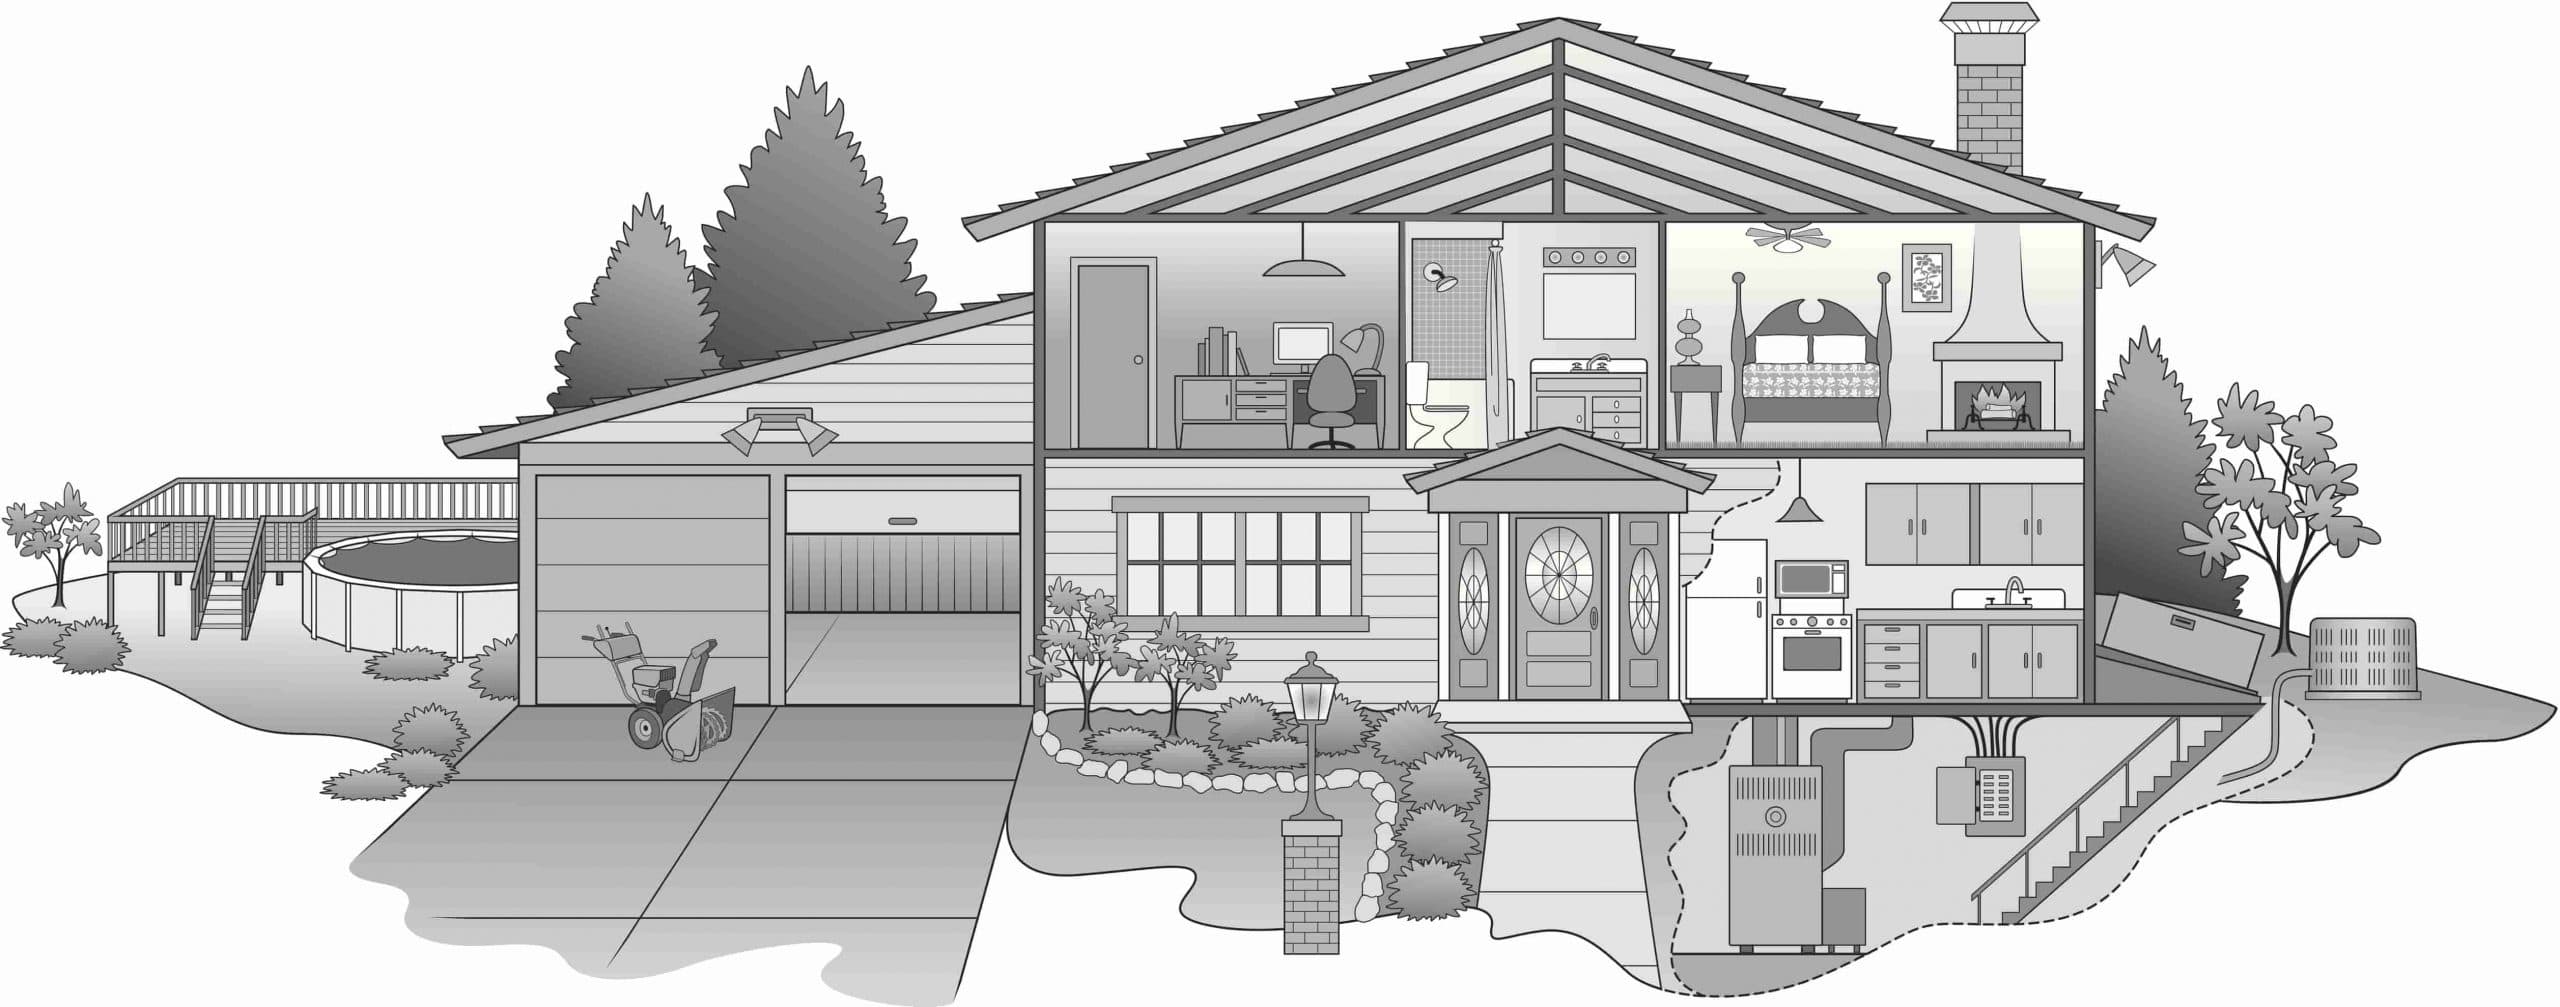 What Are the Ways a Home Envelope Can Work for Your Home?